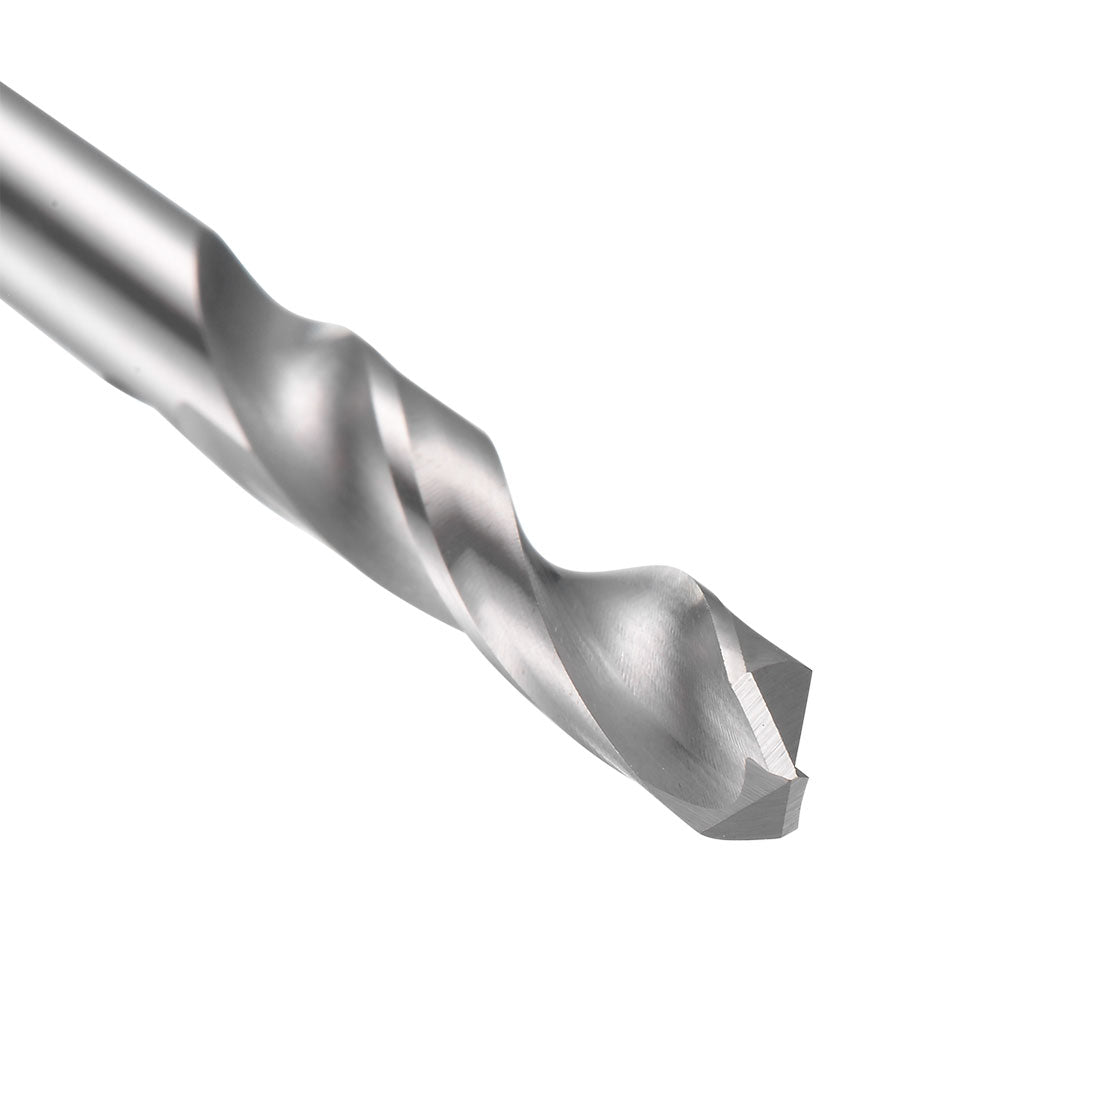 uxcell Uxcell 4.95mm Solid Carbide Drill Bits Straight Shank for Stainless Steel Alloy